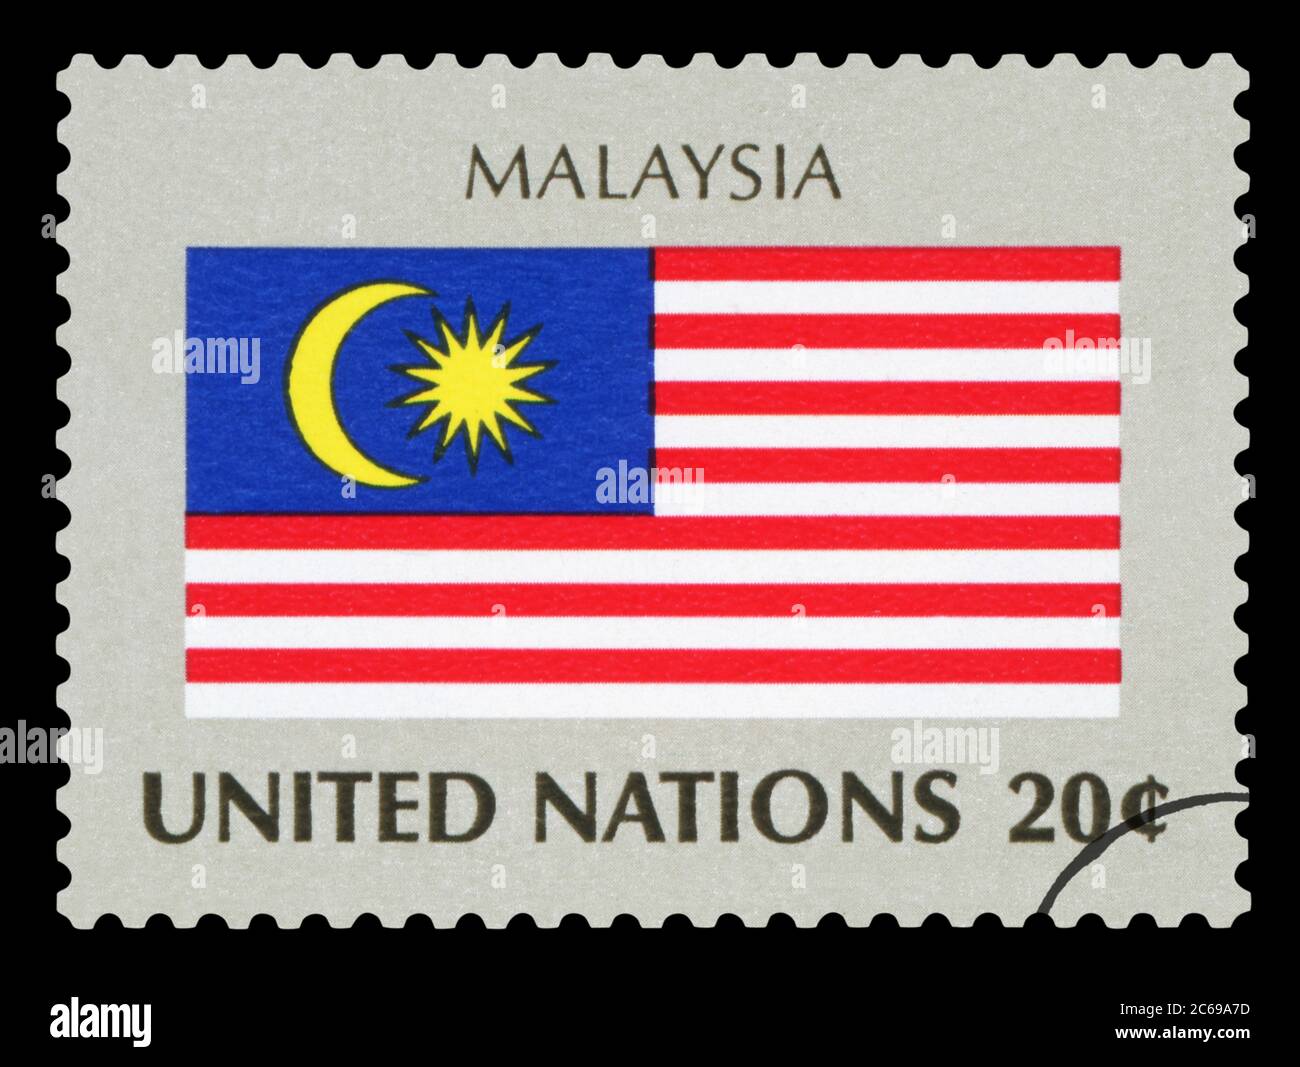 MALAYSIA - Postage Stamp of Malaysia national flag, Series of United Nations, circa 1984. Isolated on black background. Stock Photo